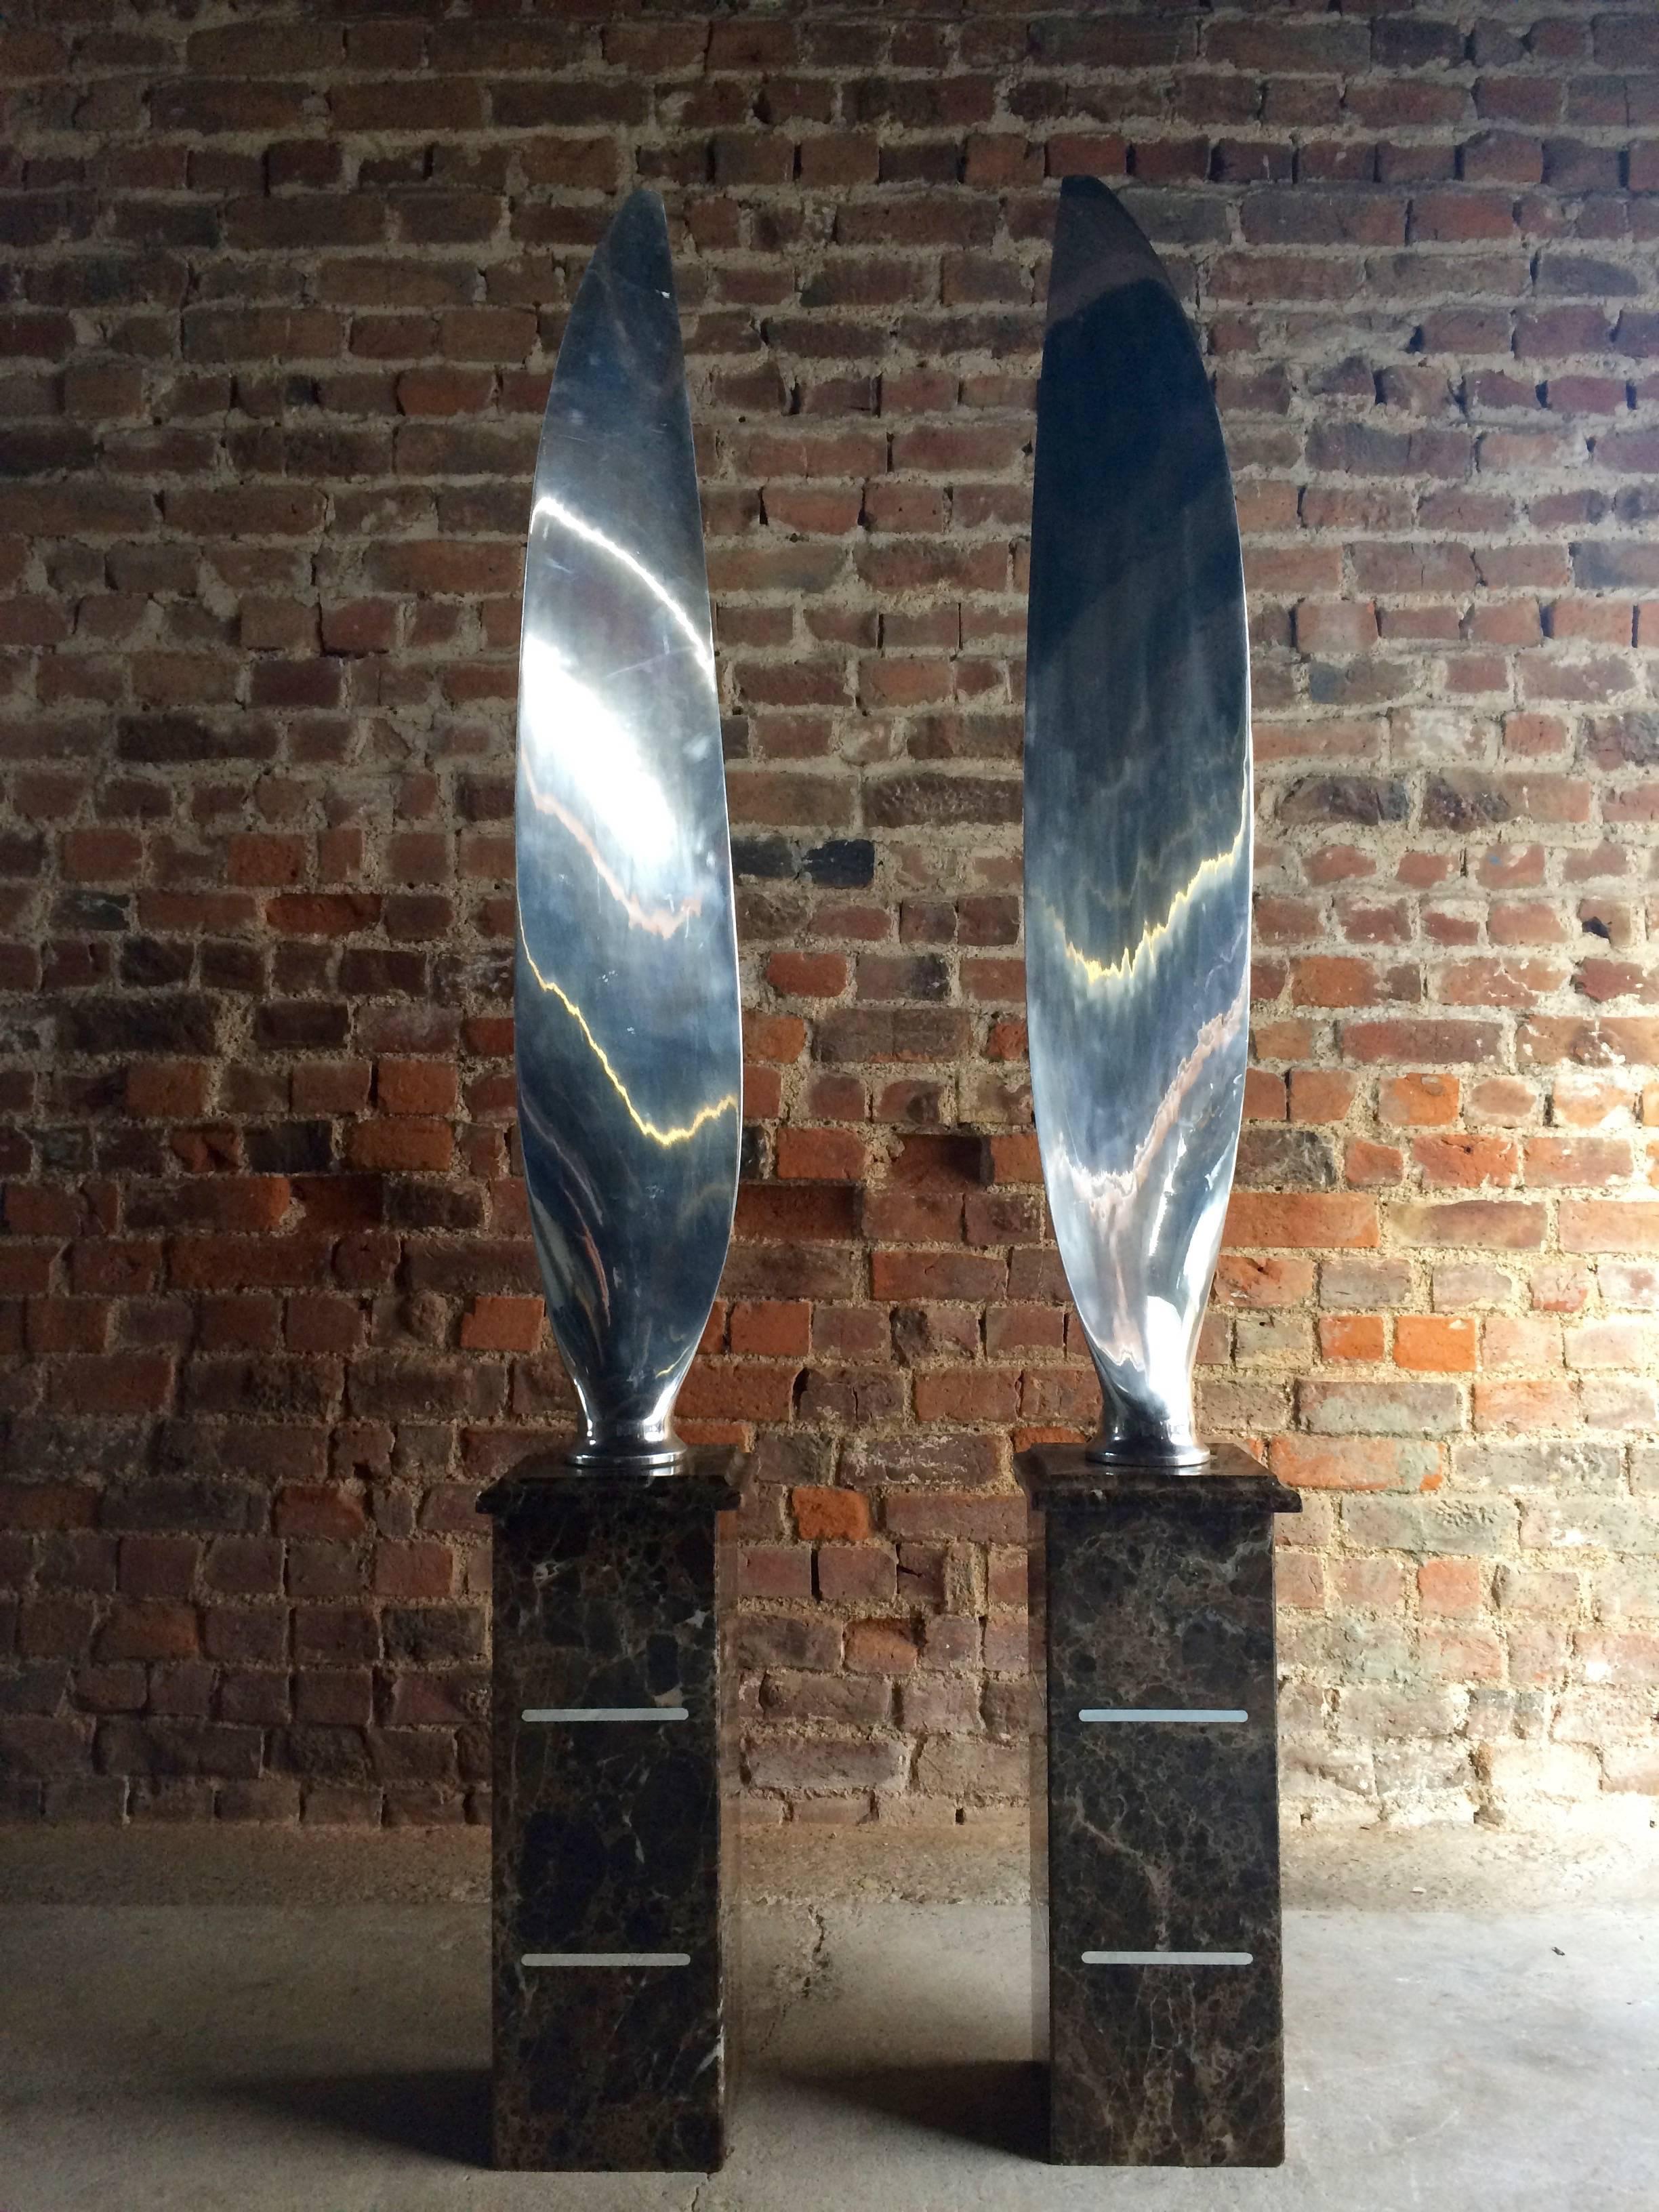 Pair of Tall Polished Chrome Airplane Propeller Blades Sculptures 3